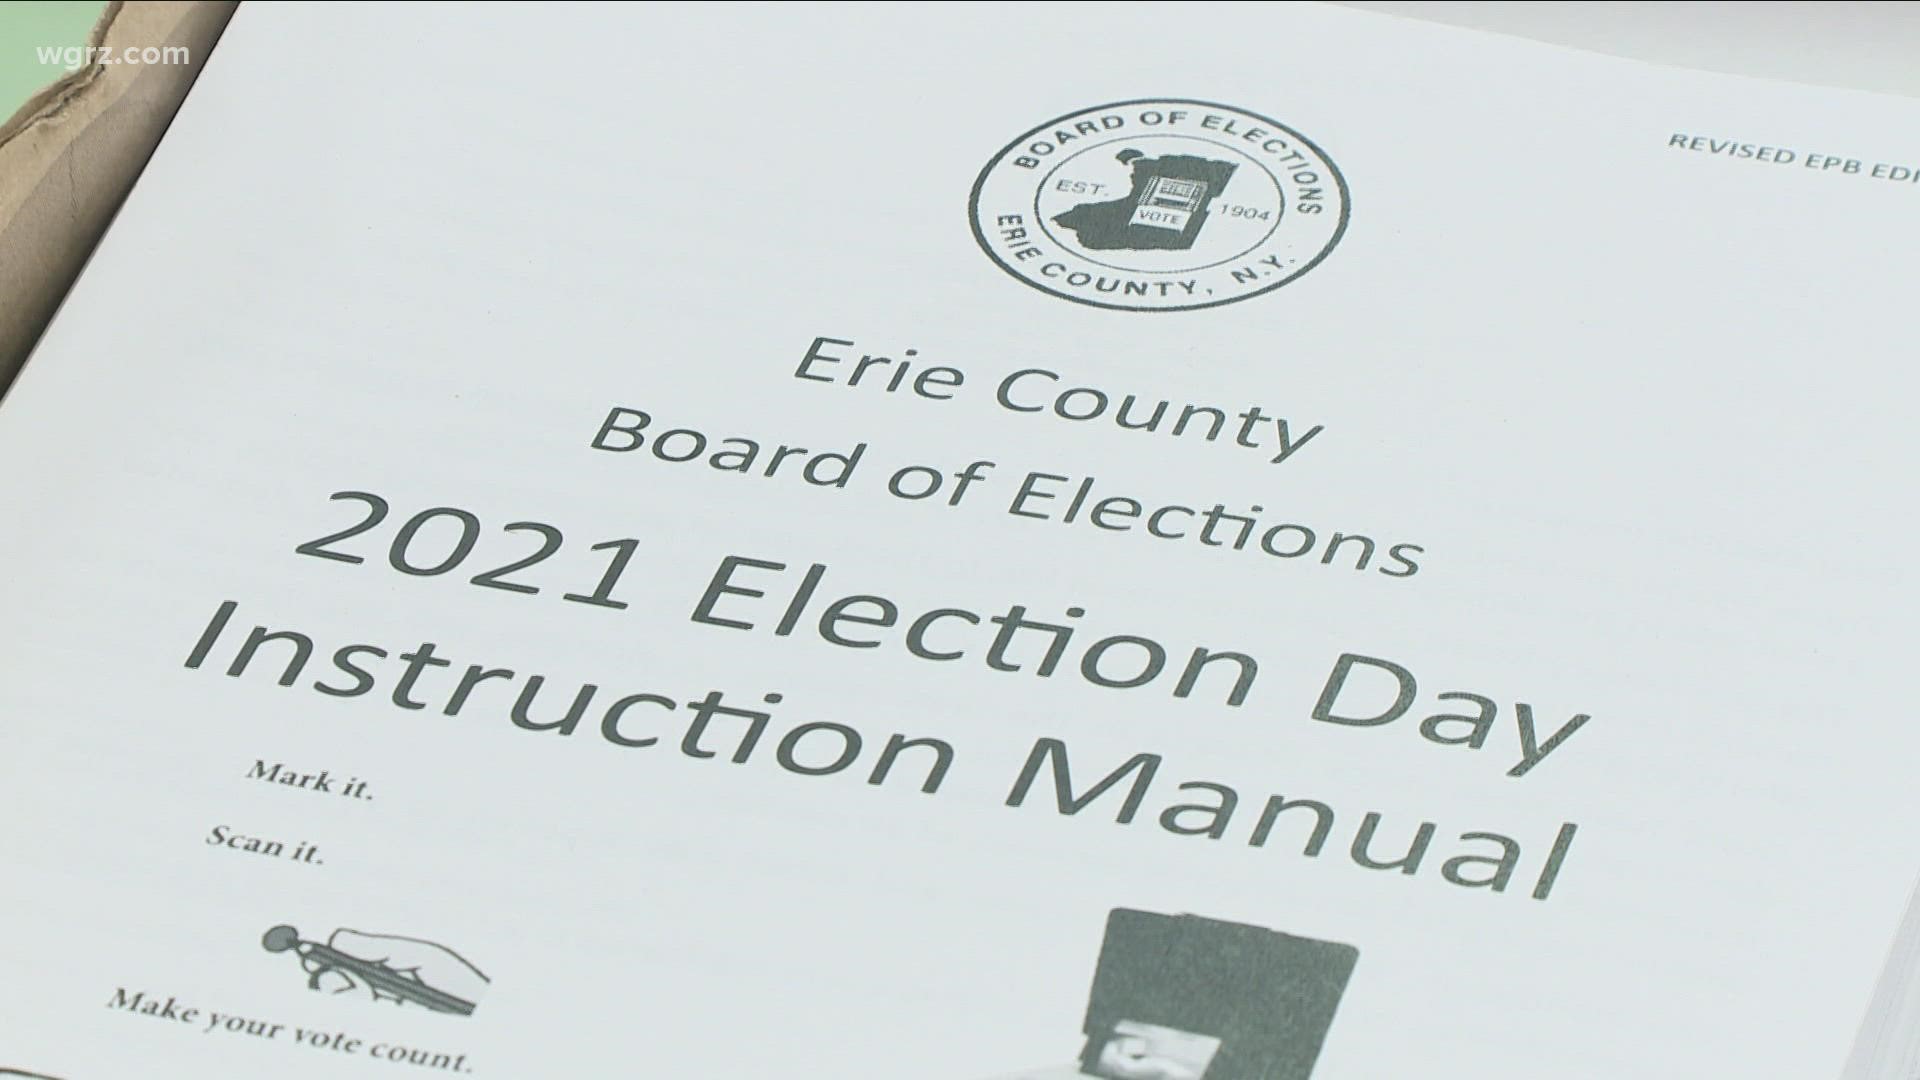 Over at the Erie County board of elections, commissioners tell us they're seeing higher than expected voter turnout in the suburbs.